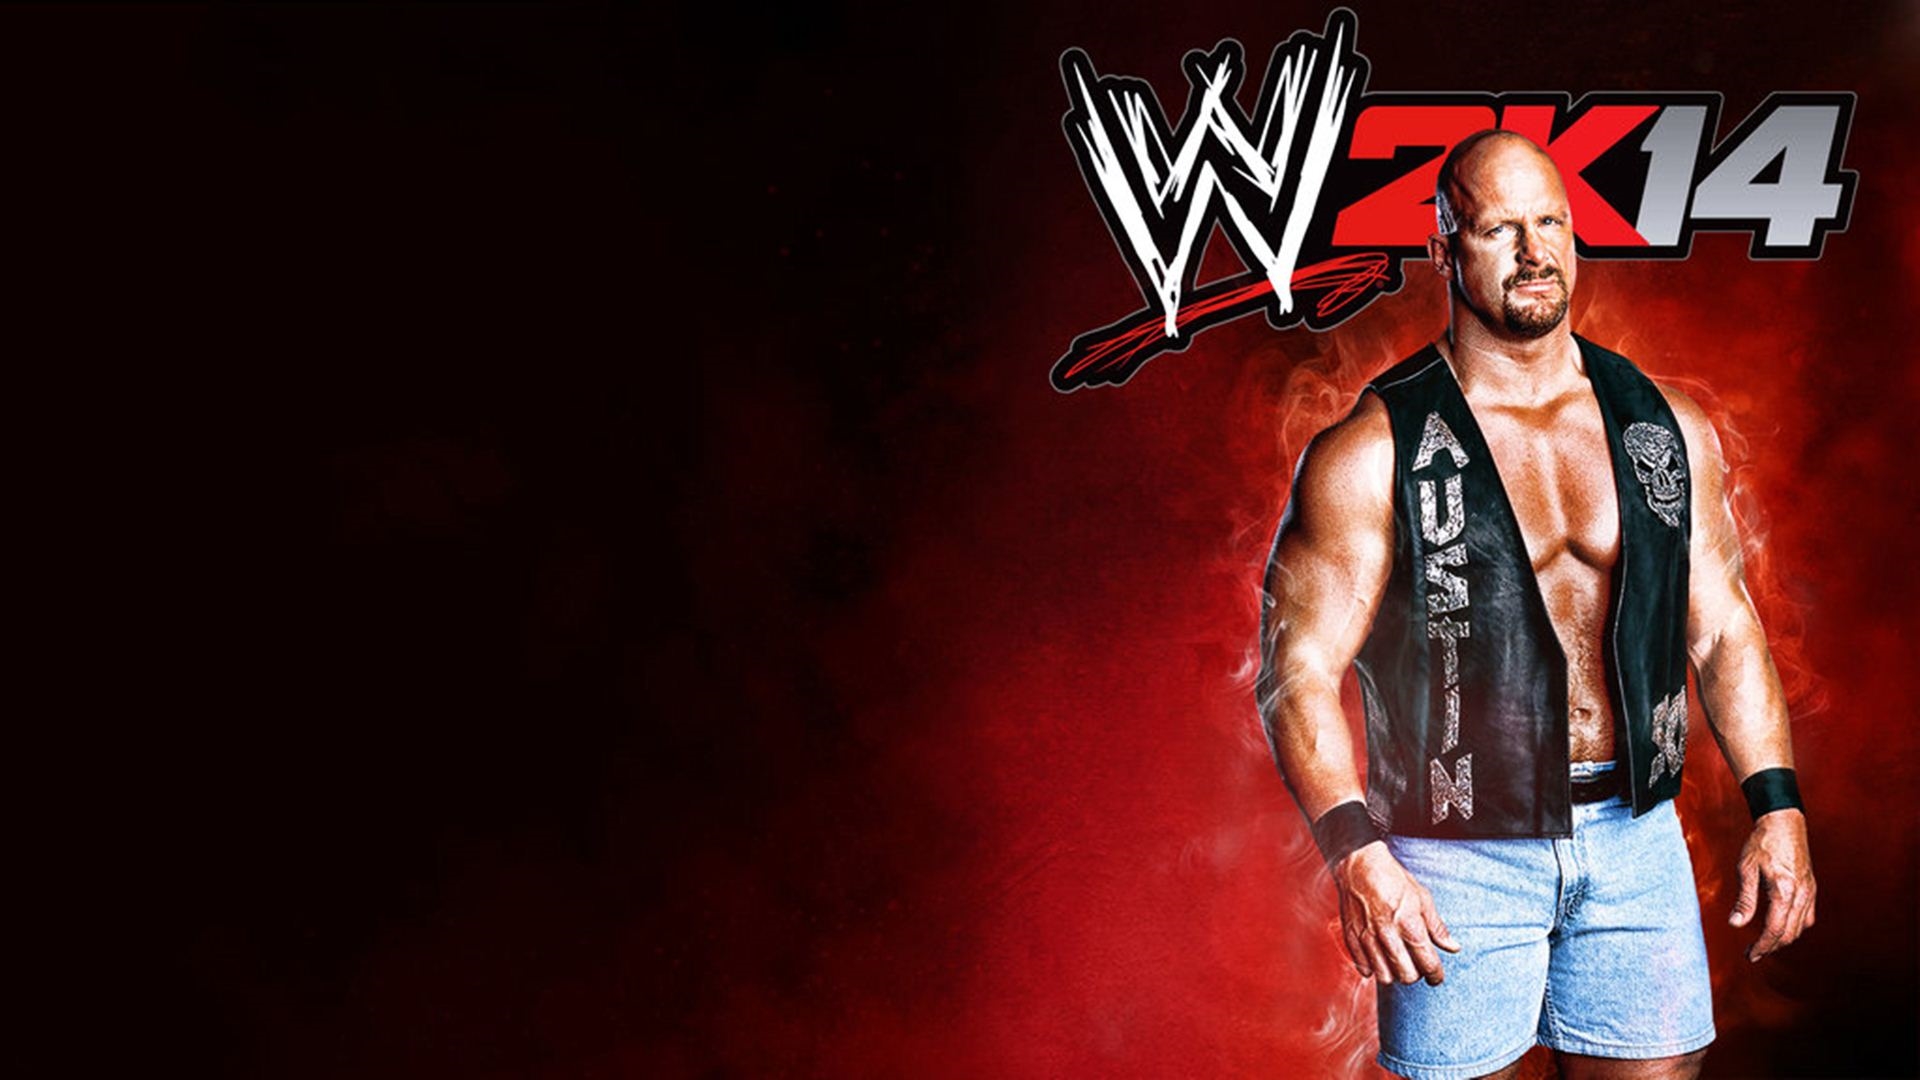 Stone cold wallpapers.